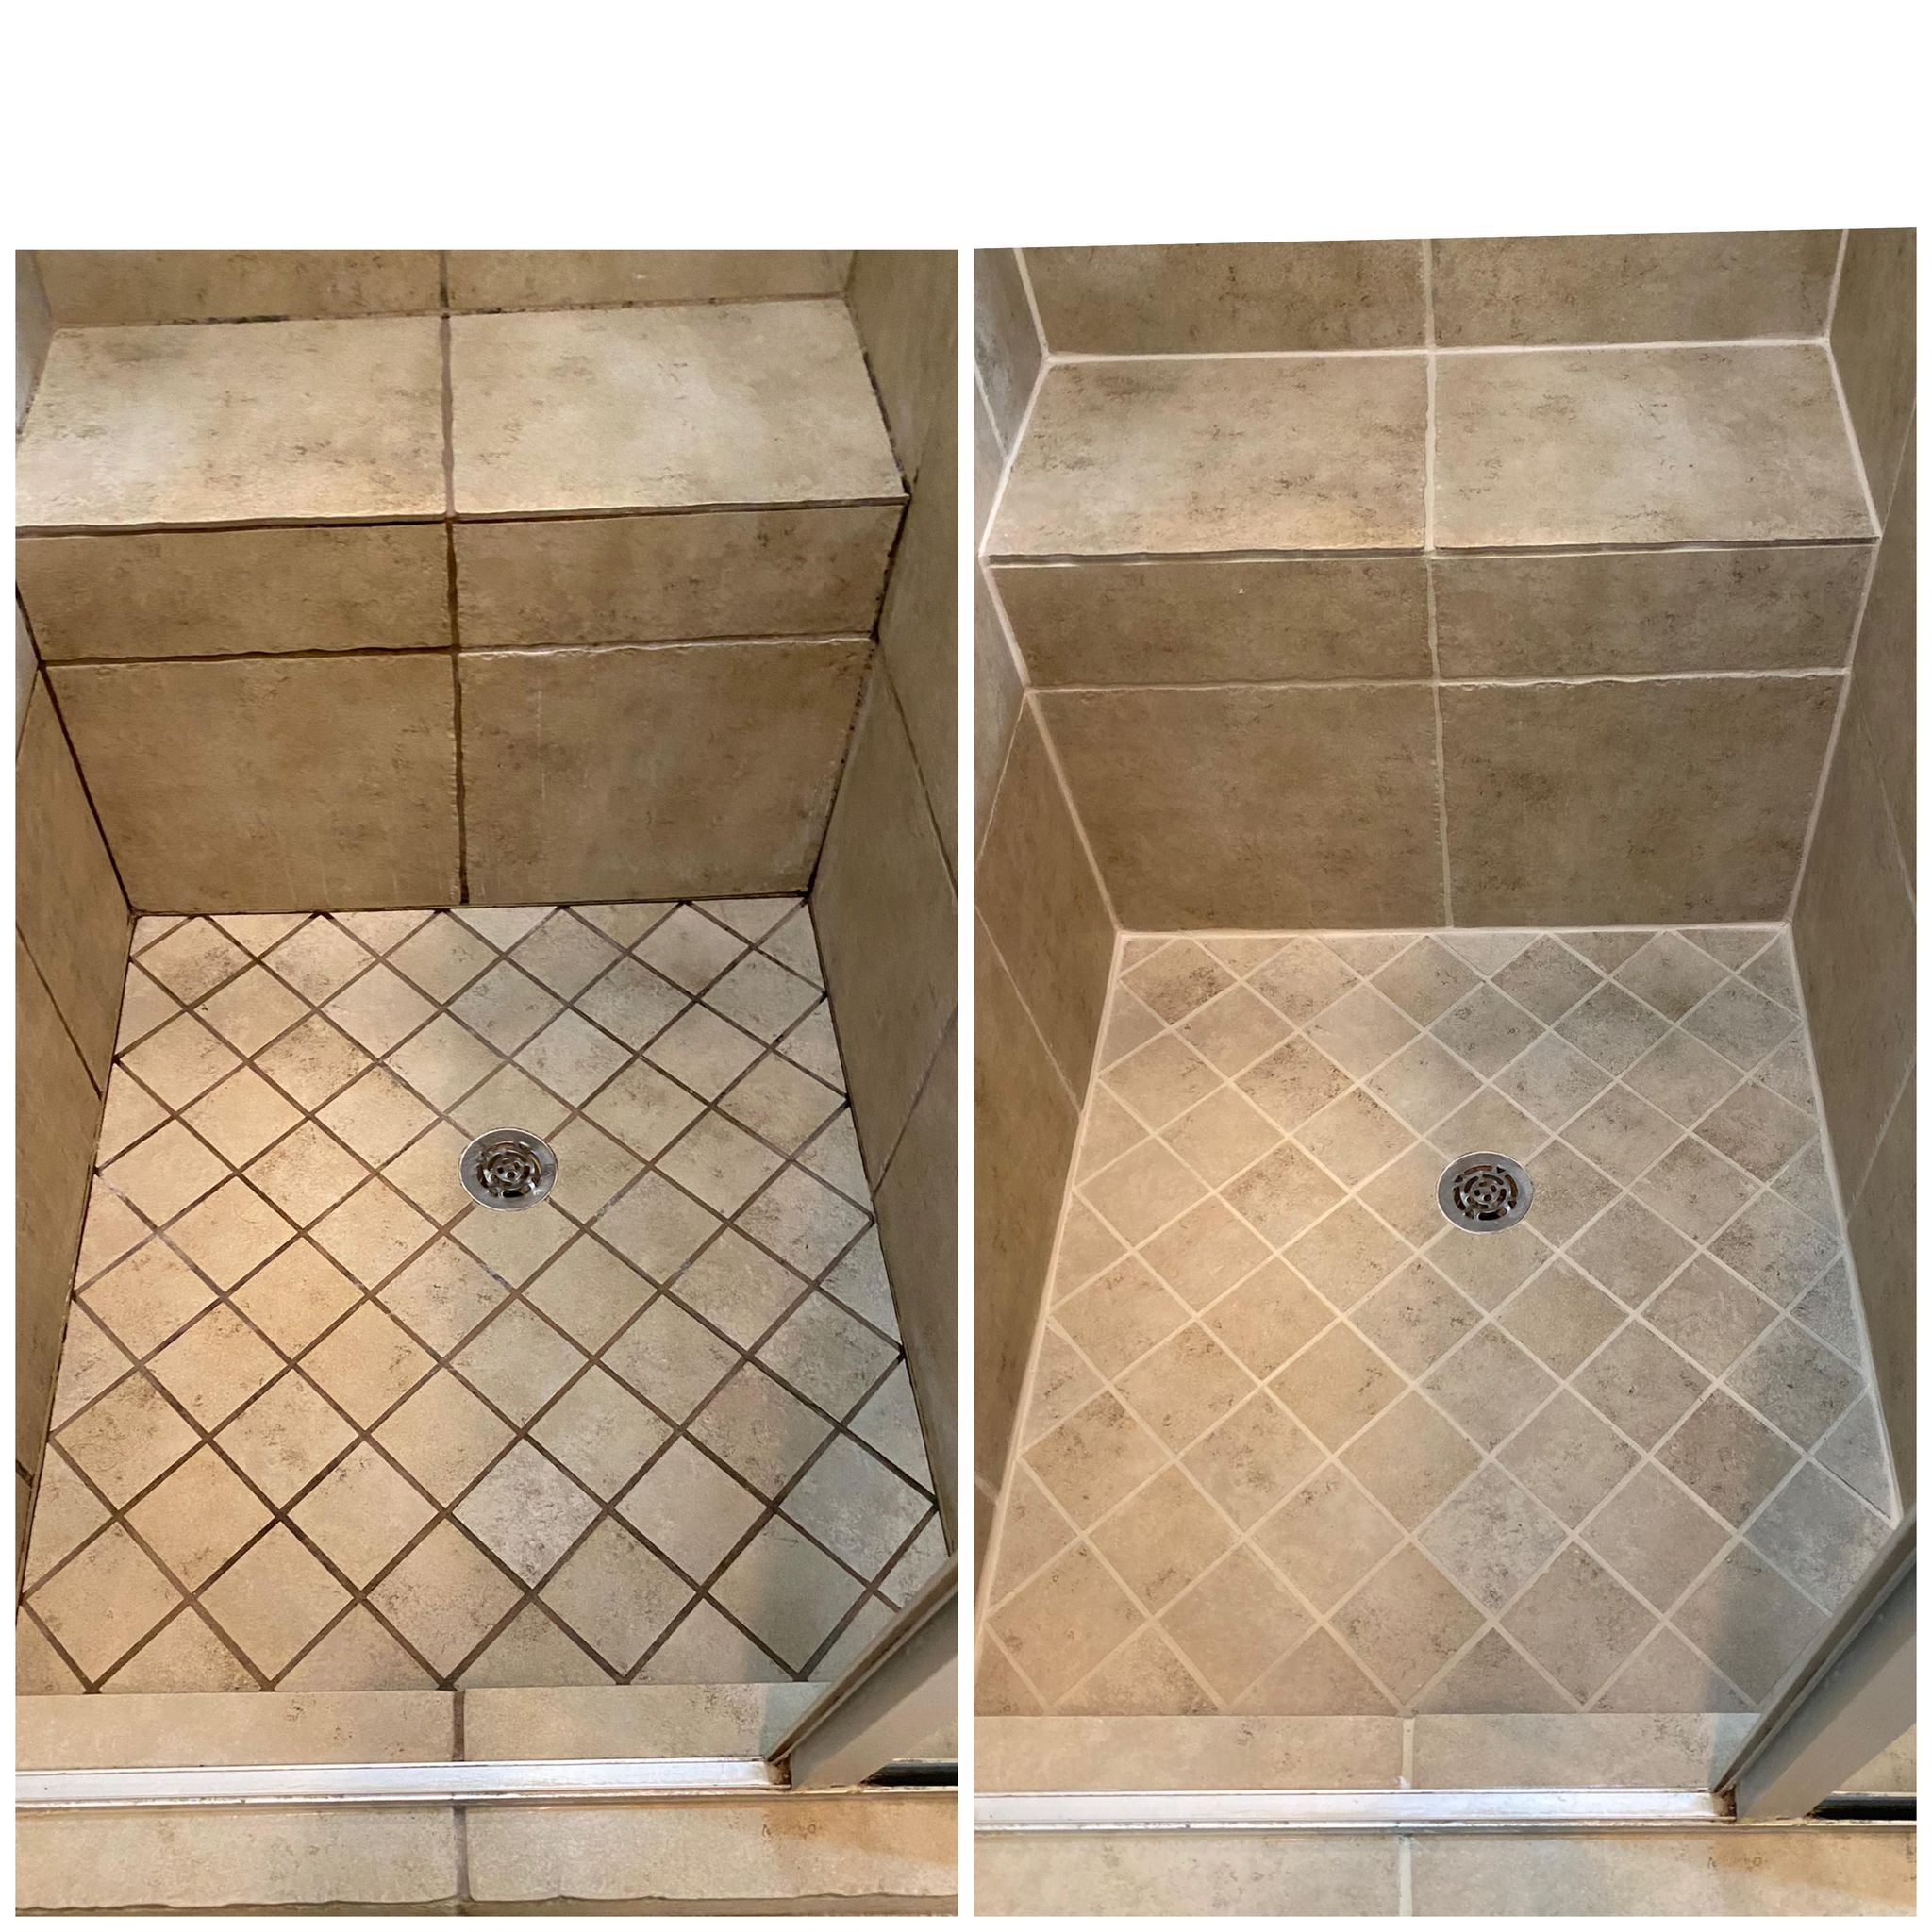 Grout Cleaning in Plano TX